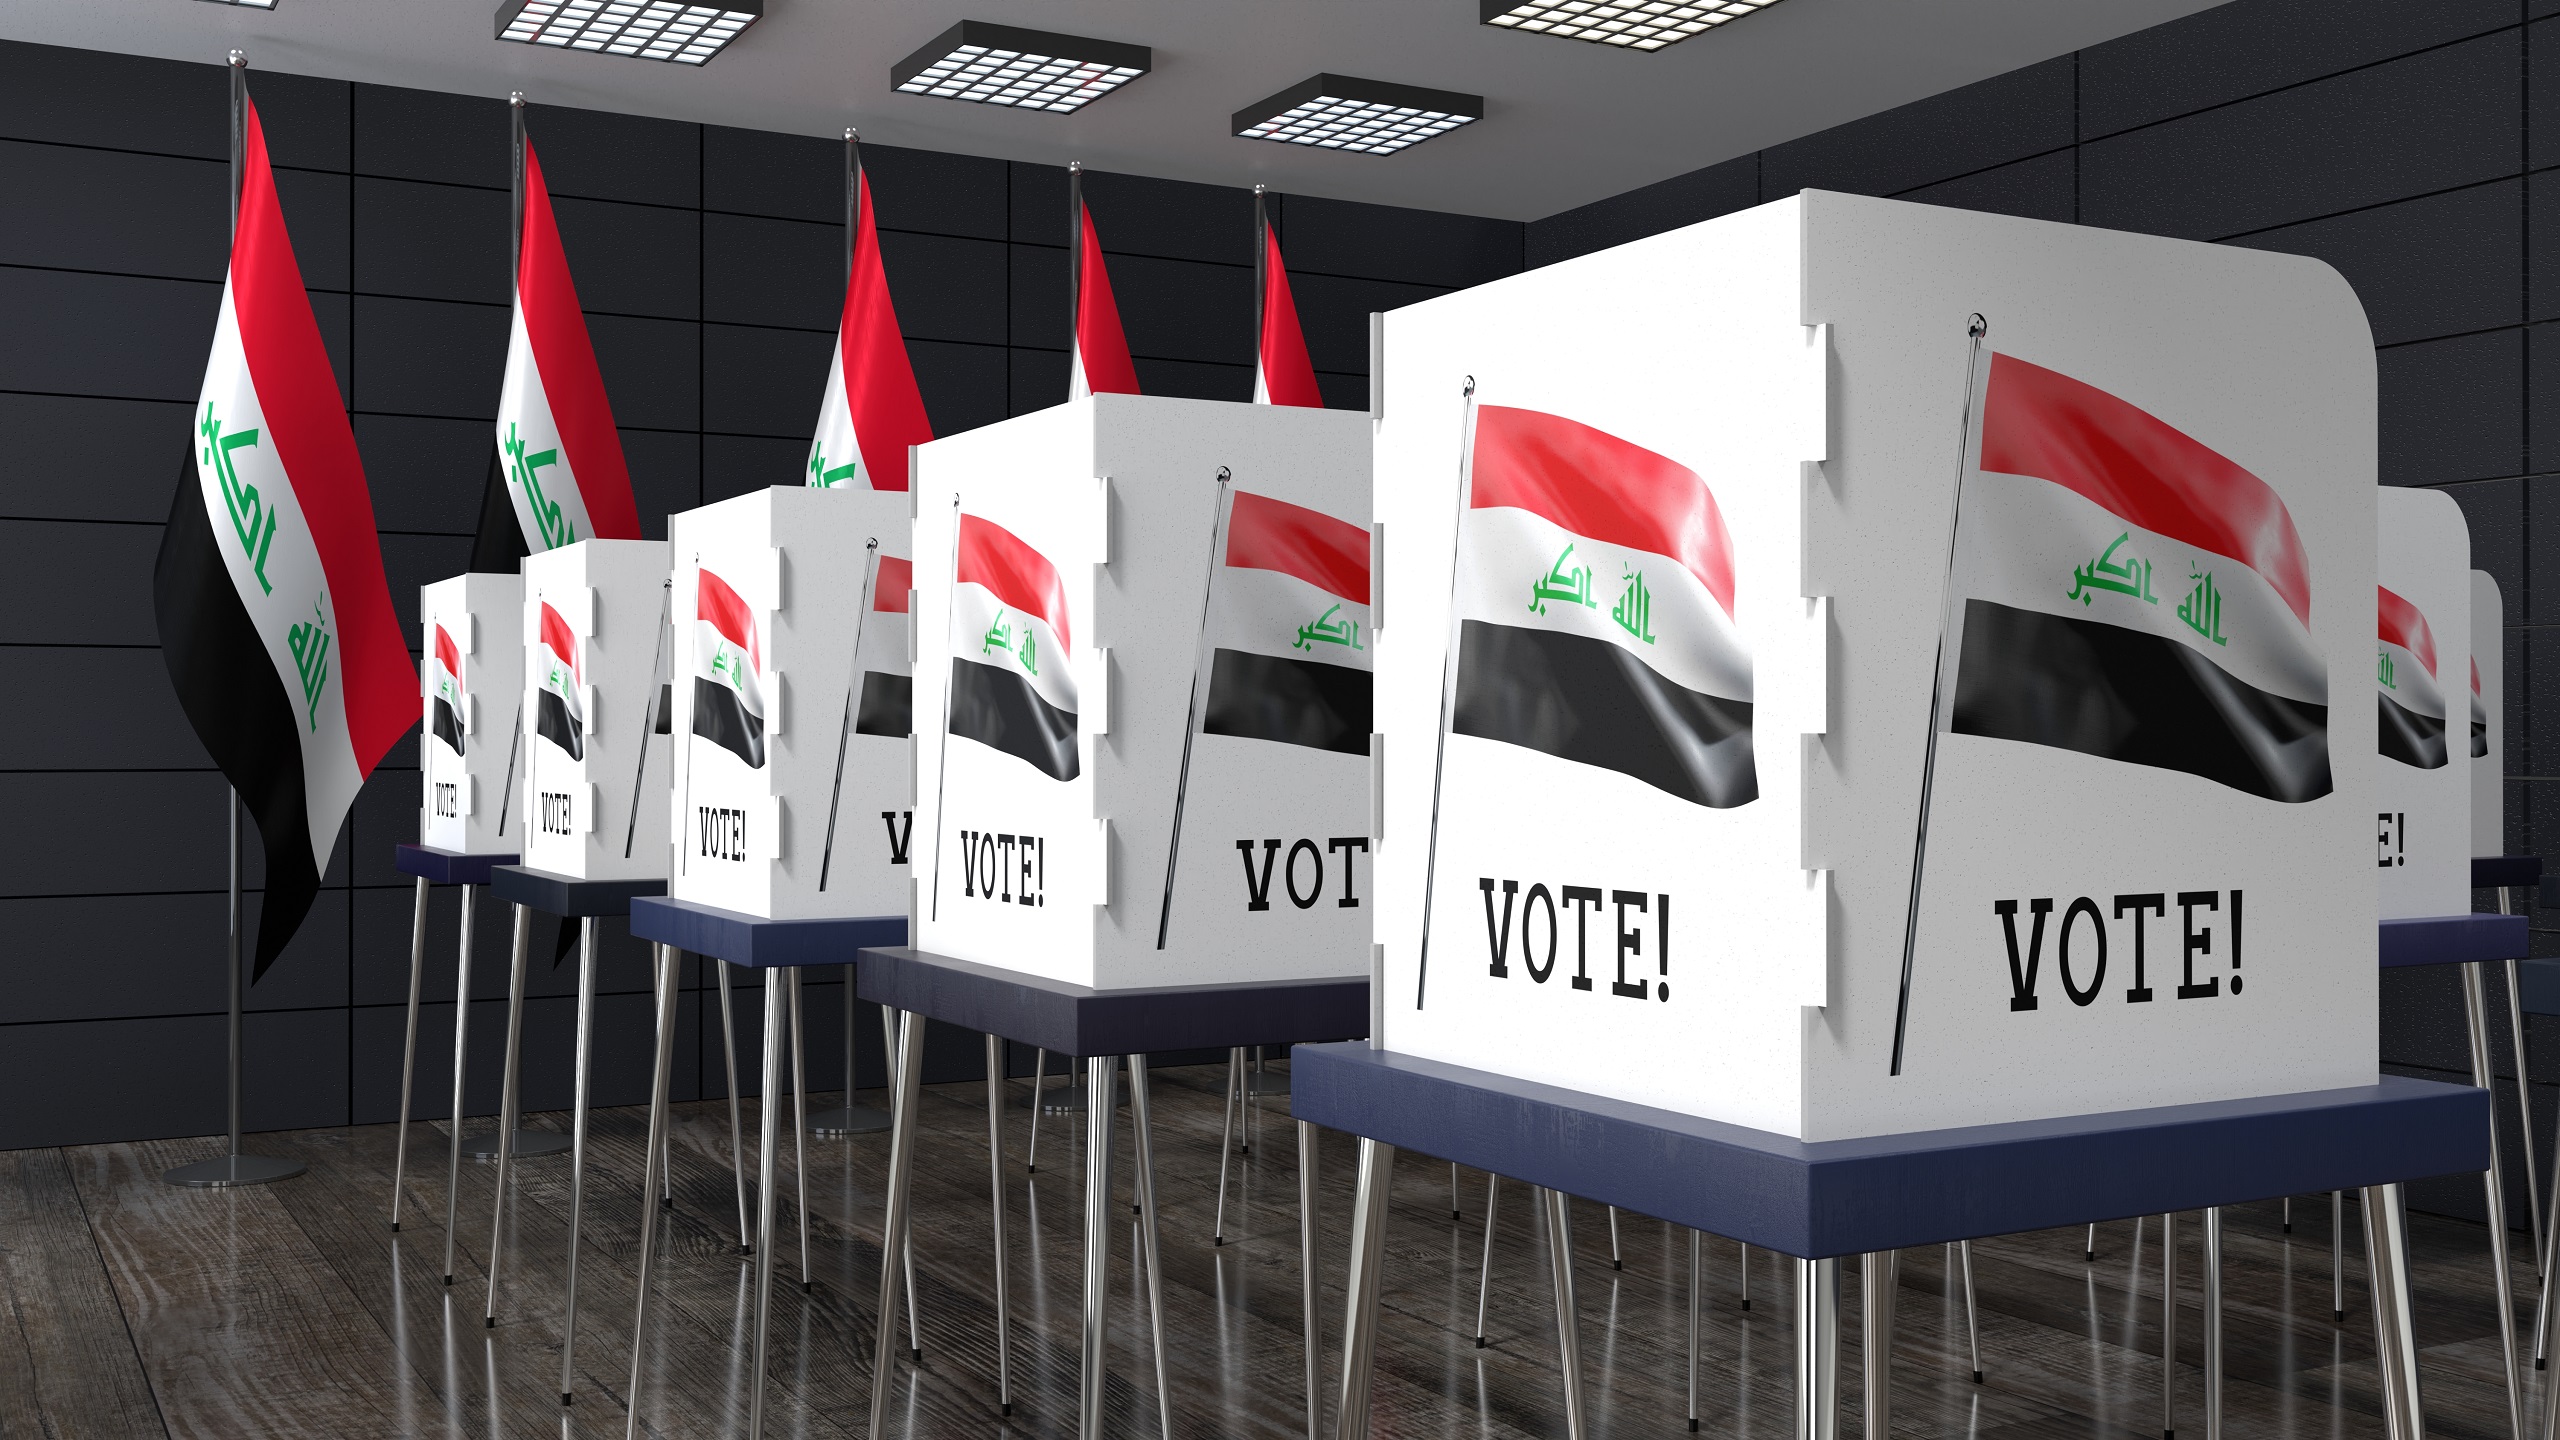 High Turnout in Iraq’s Early Voting for Provincial Elections